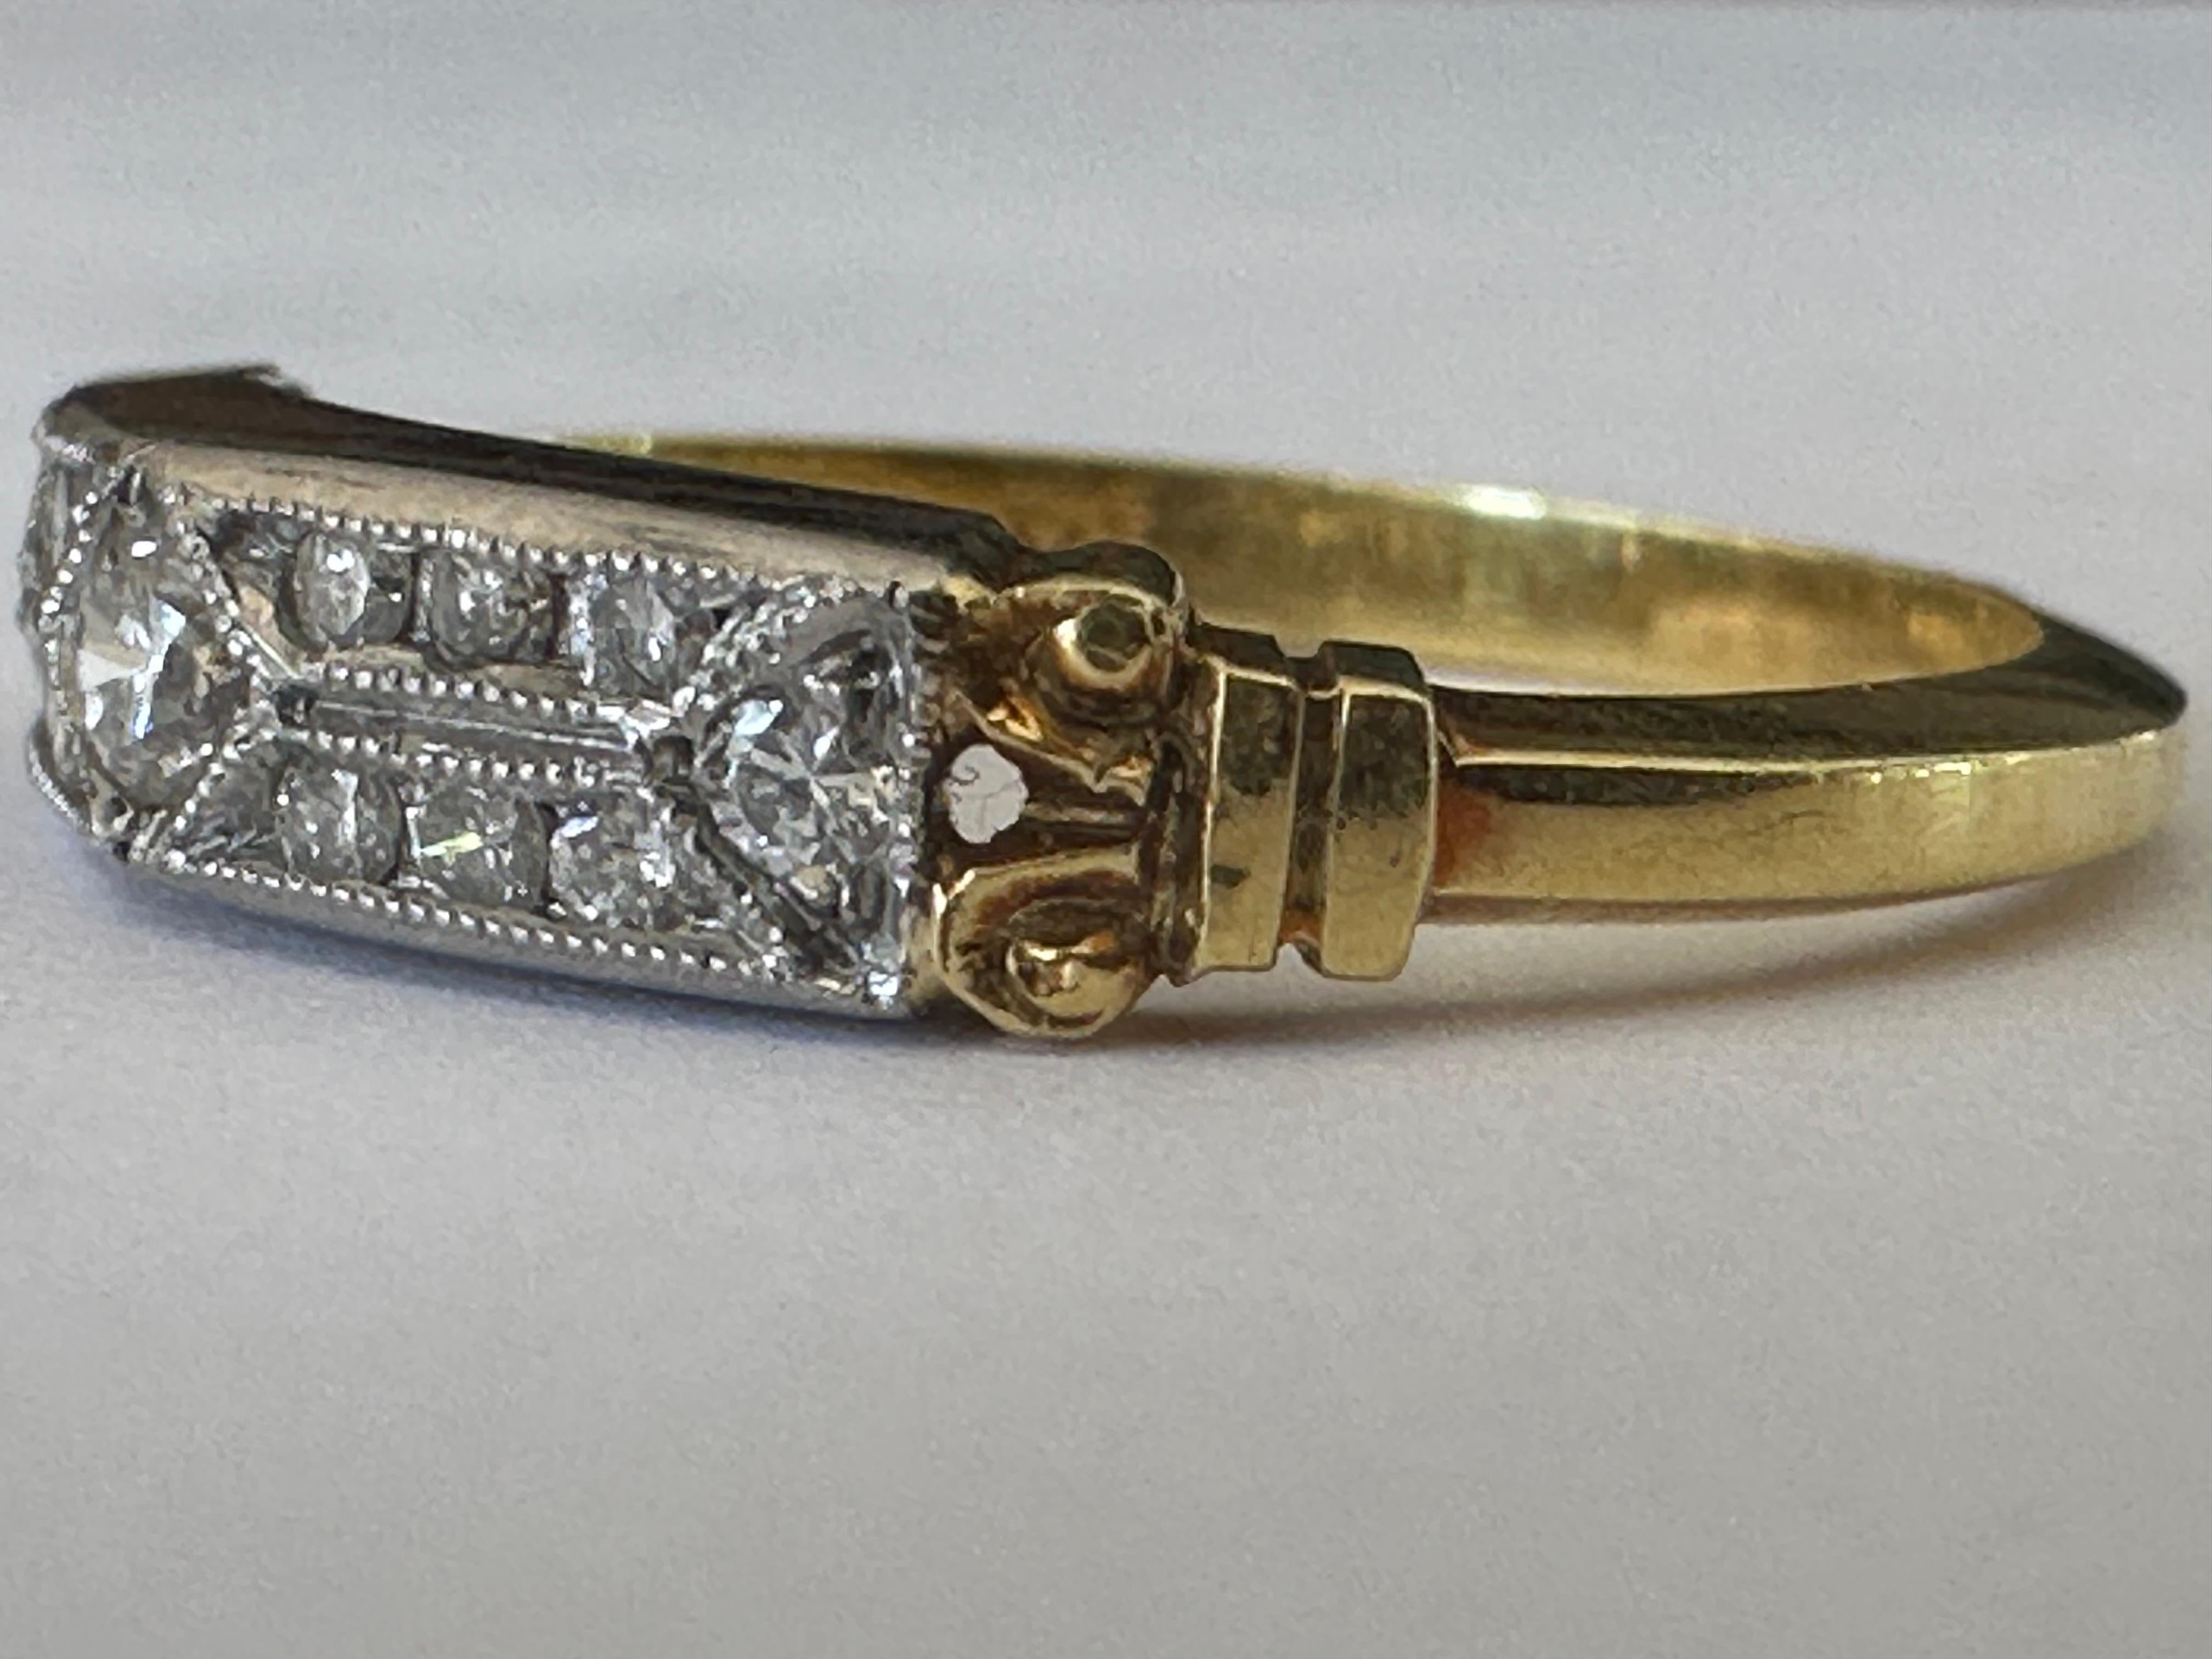 This stunning Estate wedding ring from Whitehouse Brothers in Cincinnati, Ohio is designed around fifteen round diamonds totaling 0.26 carats, EF color, VS clarity, complemented with delicate milgraining. Set in platinum and 18K yellow gold. Stamped